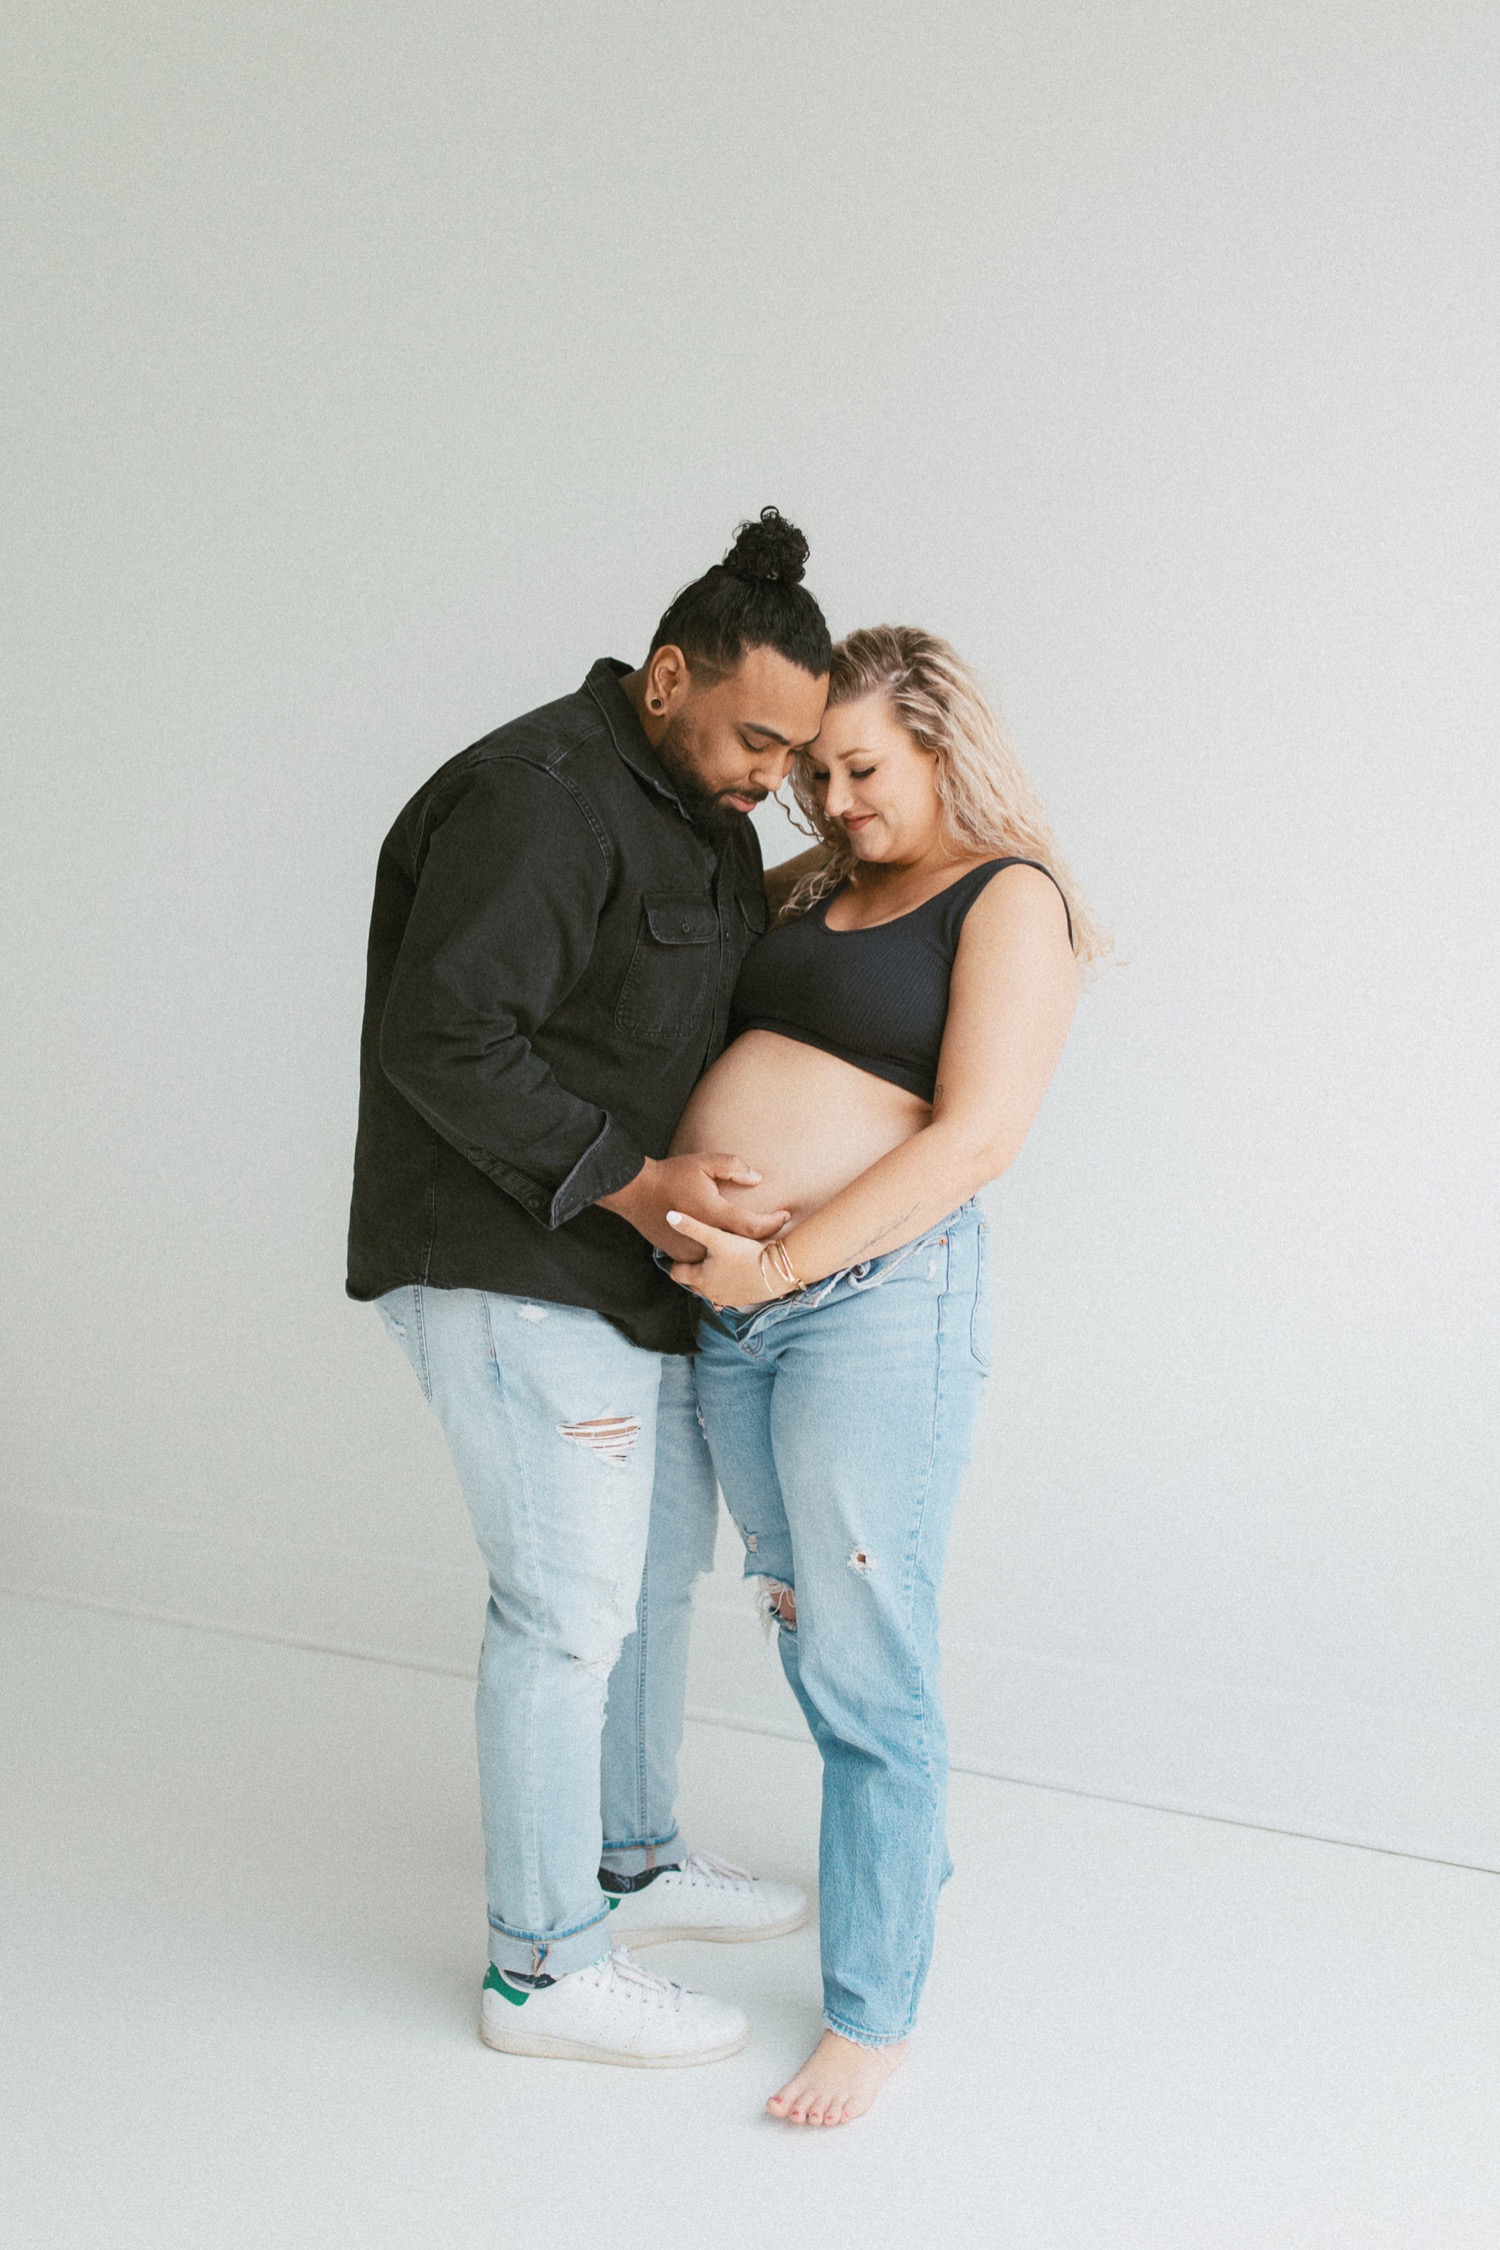 Loved this maternity shoot with Ronnie & Chad 🔥🔥🔥🔥🔥🔥🔥🔥 such a  beautiful couple with the new addition on the way �... | Instagram